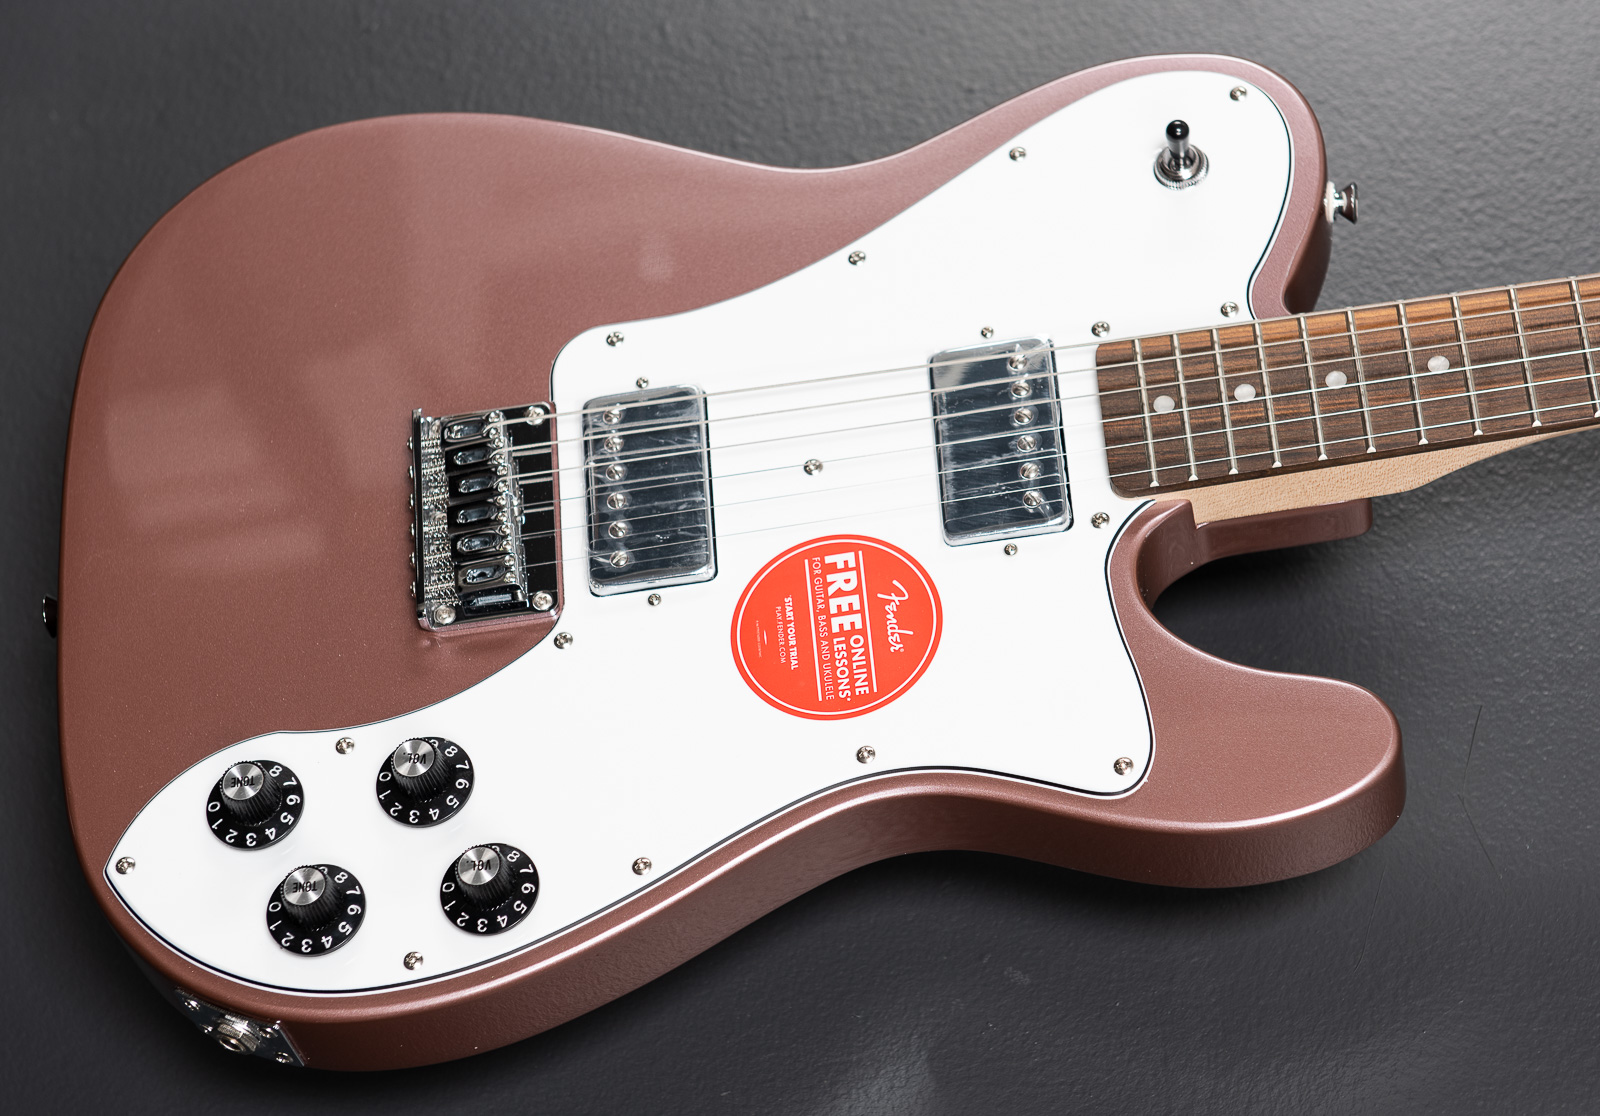 Squier Affinity Telecaster Deluxe: The Best Cheap Tele Yet